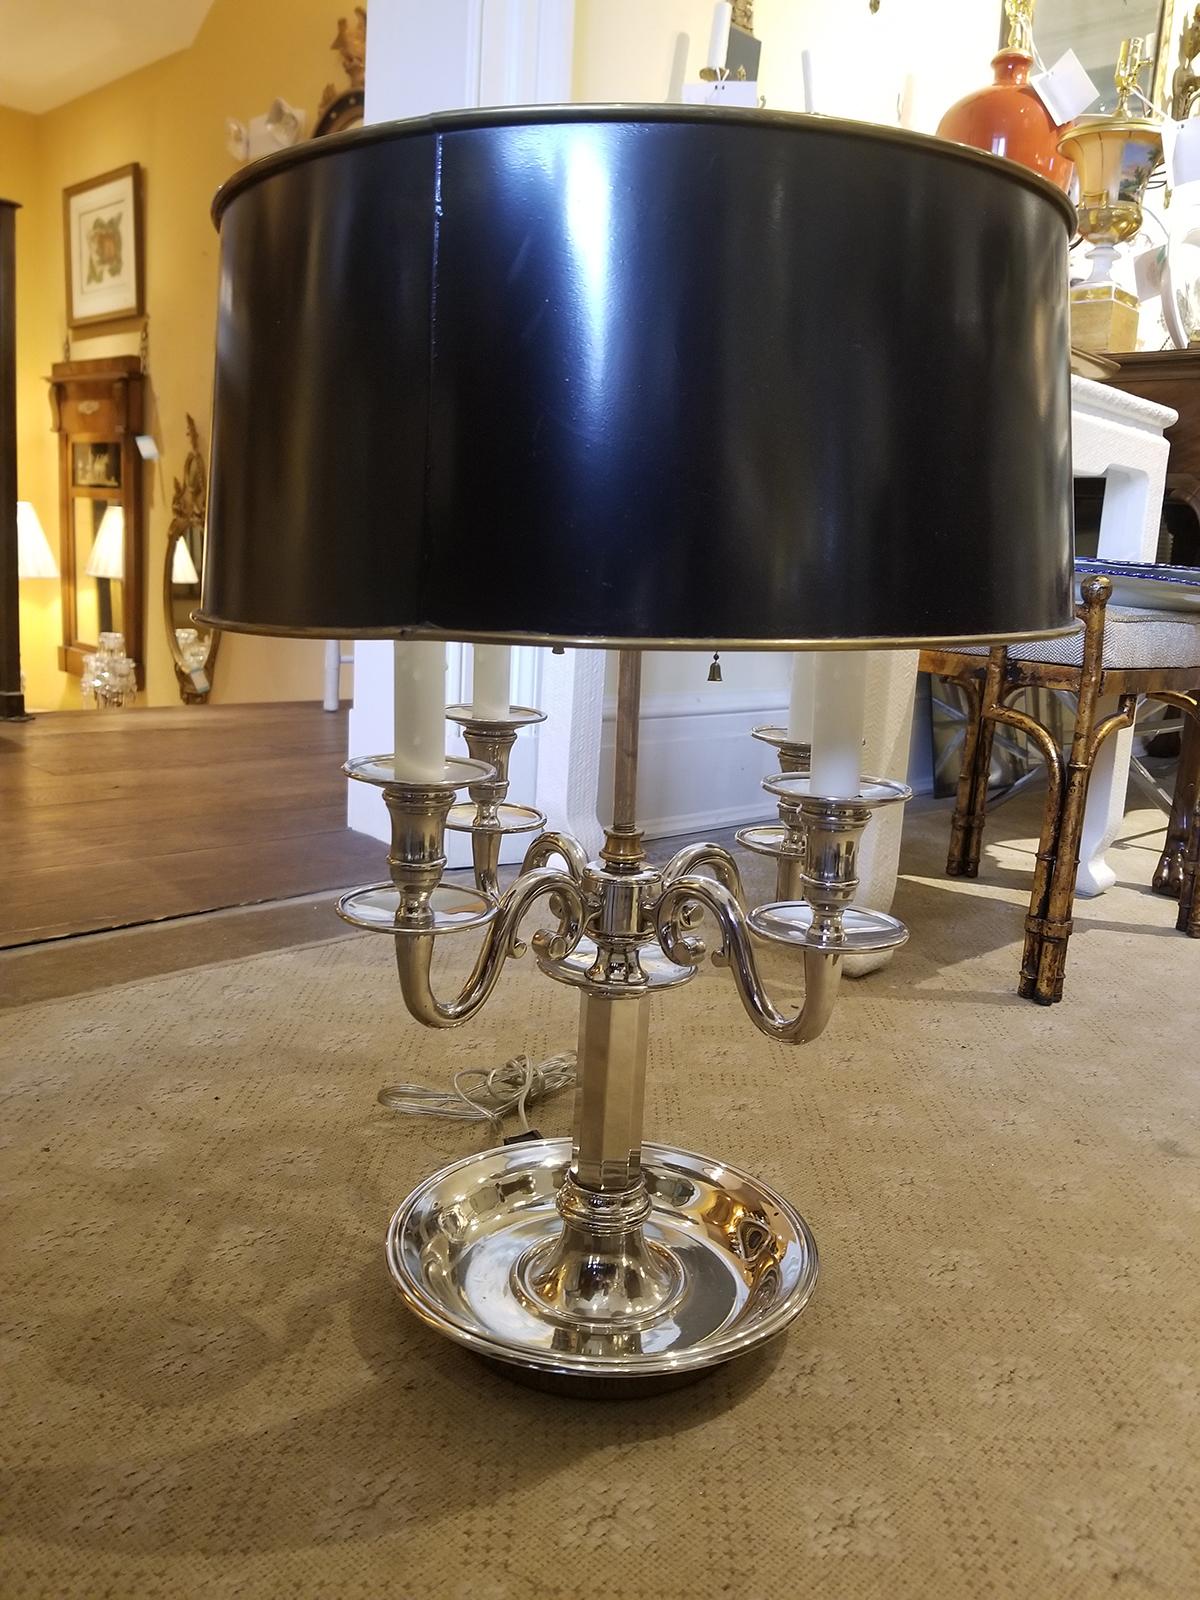 20th century French silvered four-arm Bouillotte lamp with tole shade
Large scale
New wiring.